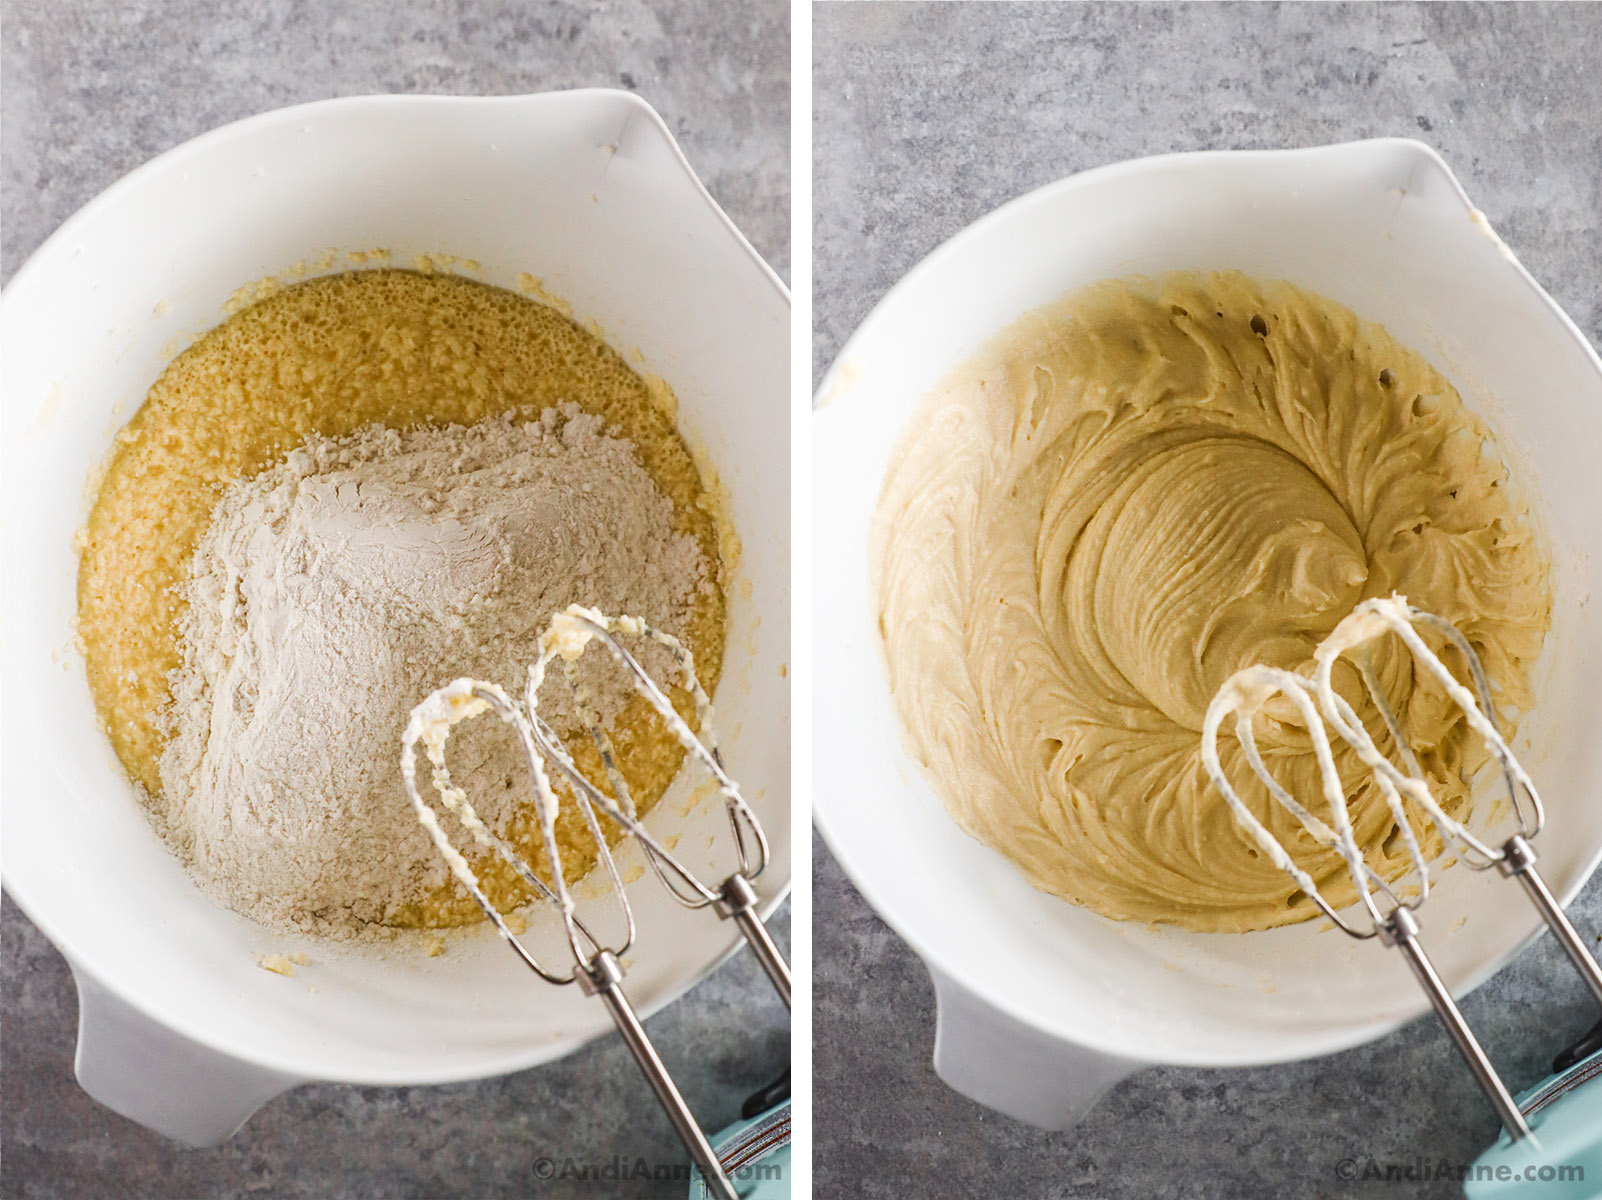 Two images of wet batter ingredients in various stages with hand mixer.